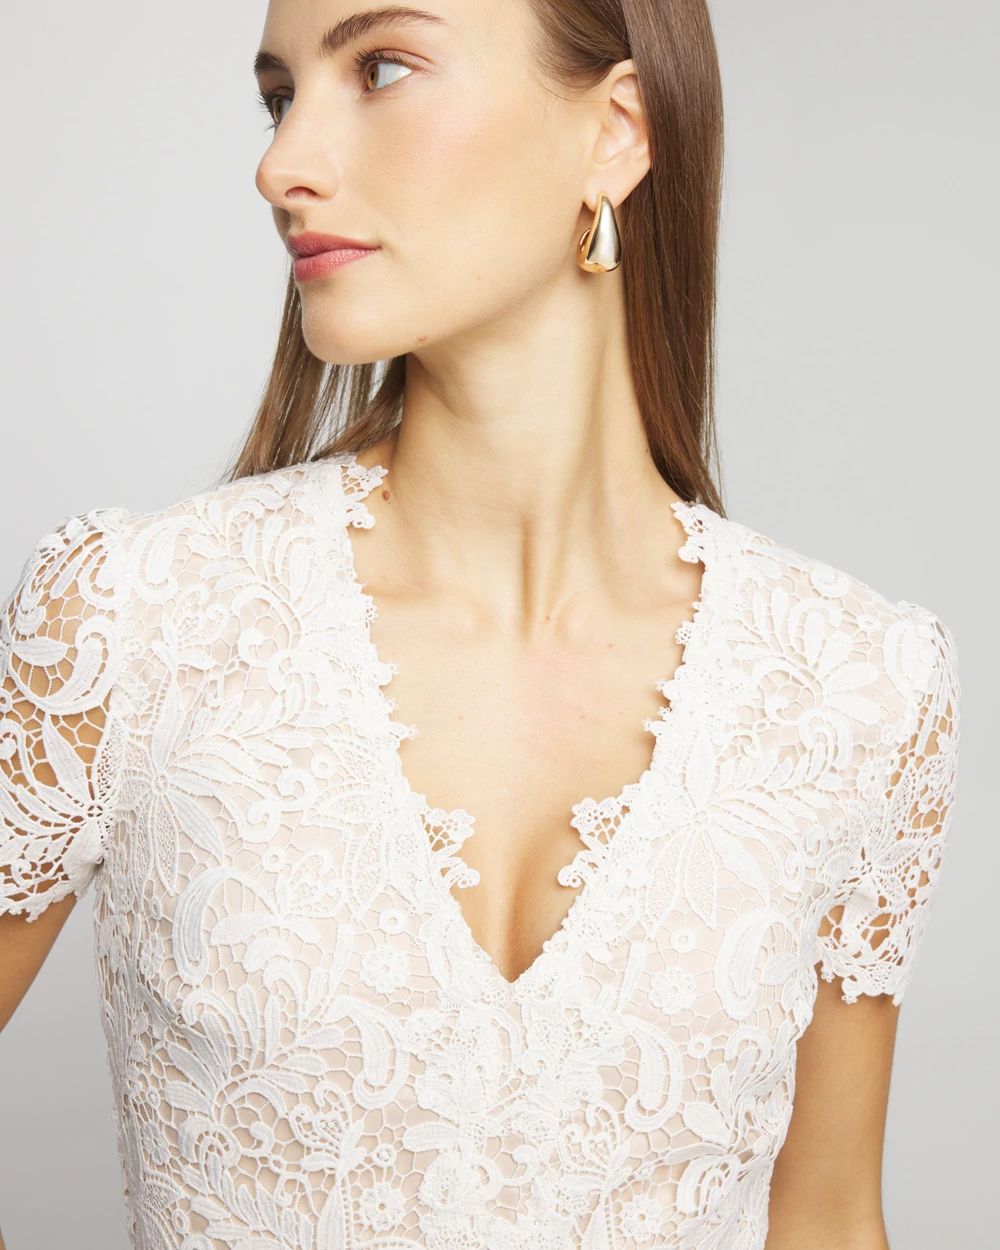 Short Sleeve V-Neck Lace Sheath Dress click to view larger image.